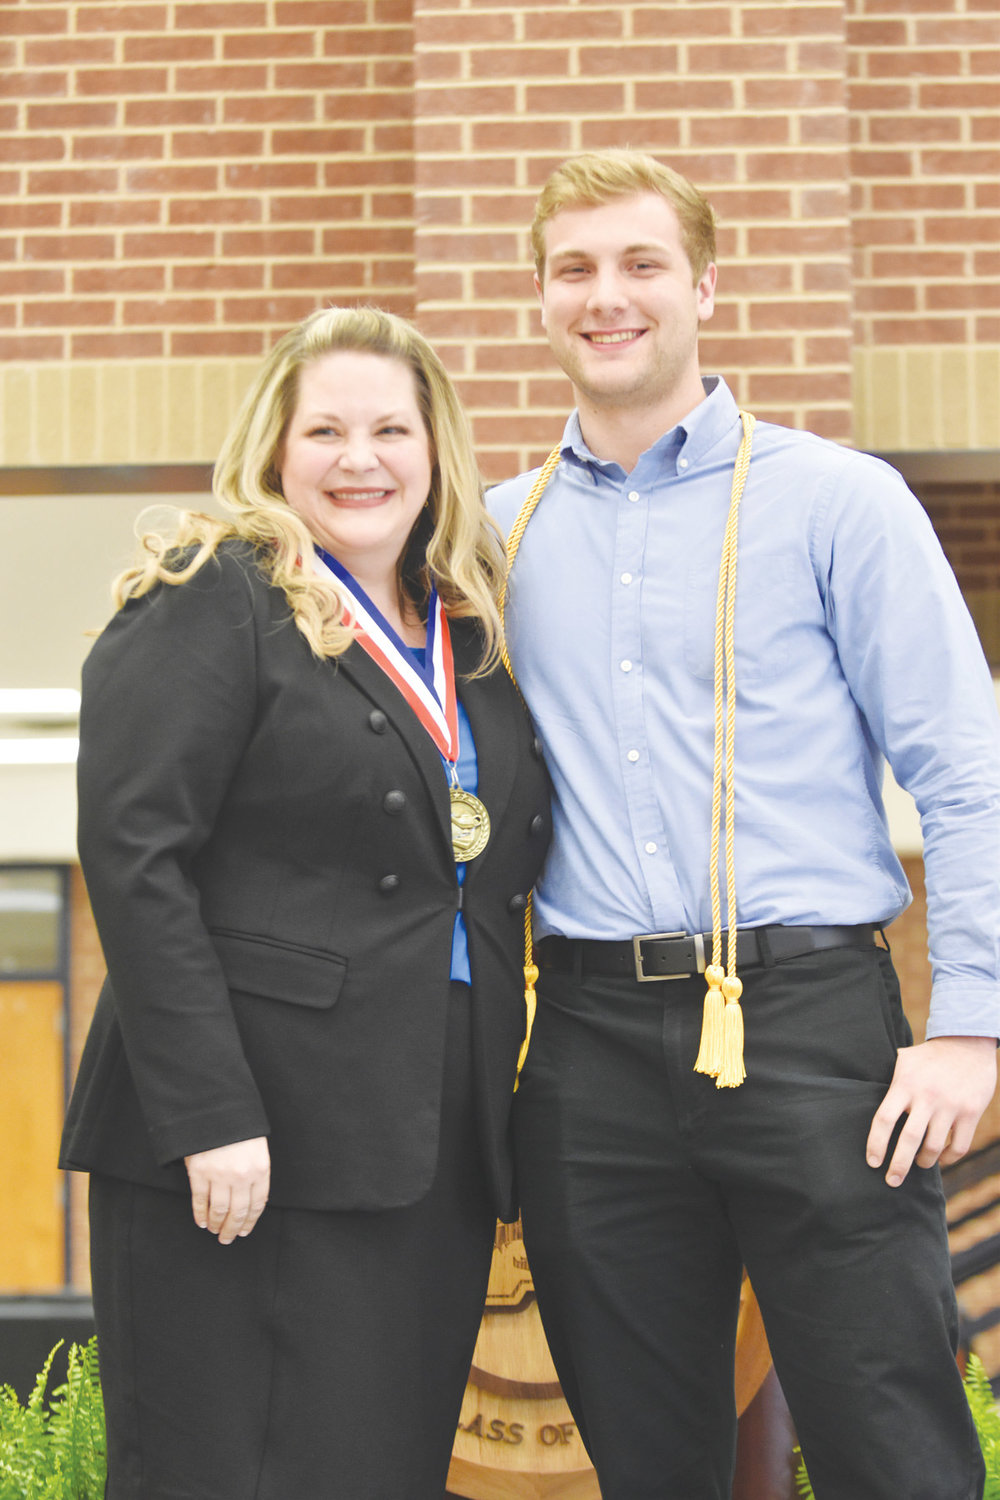 Daniel Bunting is the son of Jason and Stefanie Bunting. Daniel plans to attend Texas A&M University, and get his bachelor’s in Business Administration. He honored Mrs. Amber Wheeler.